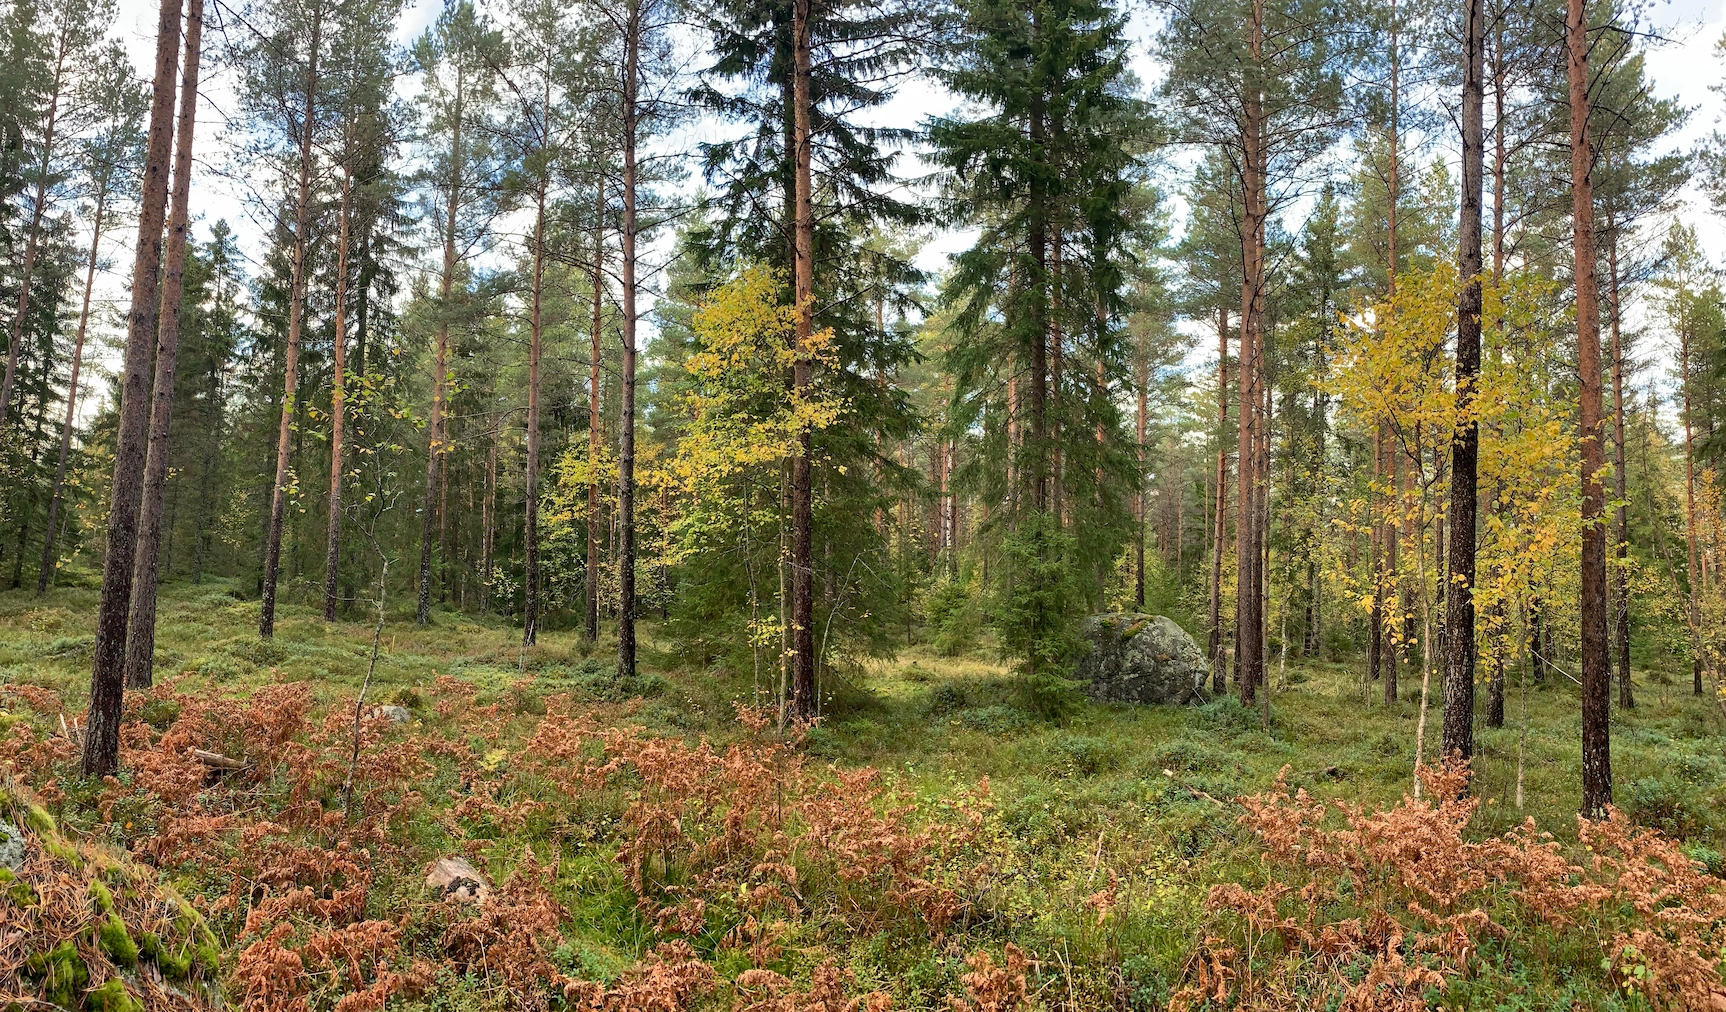 Panorama of a Finnish forest in fall, dead ferns cover the ground